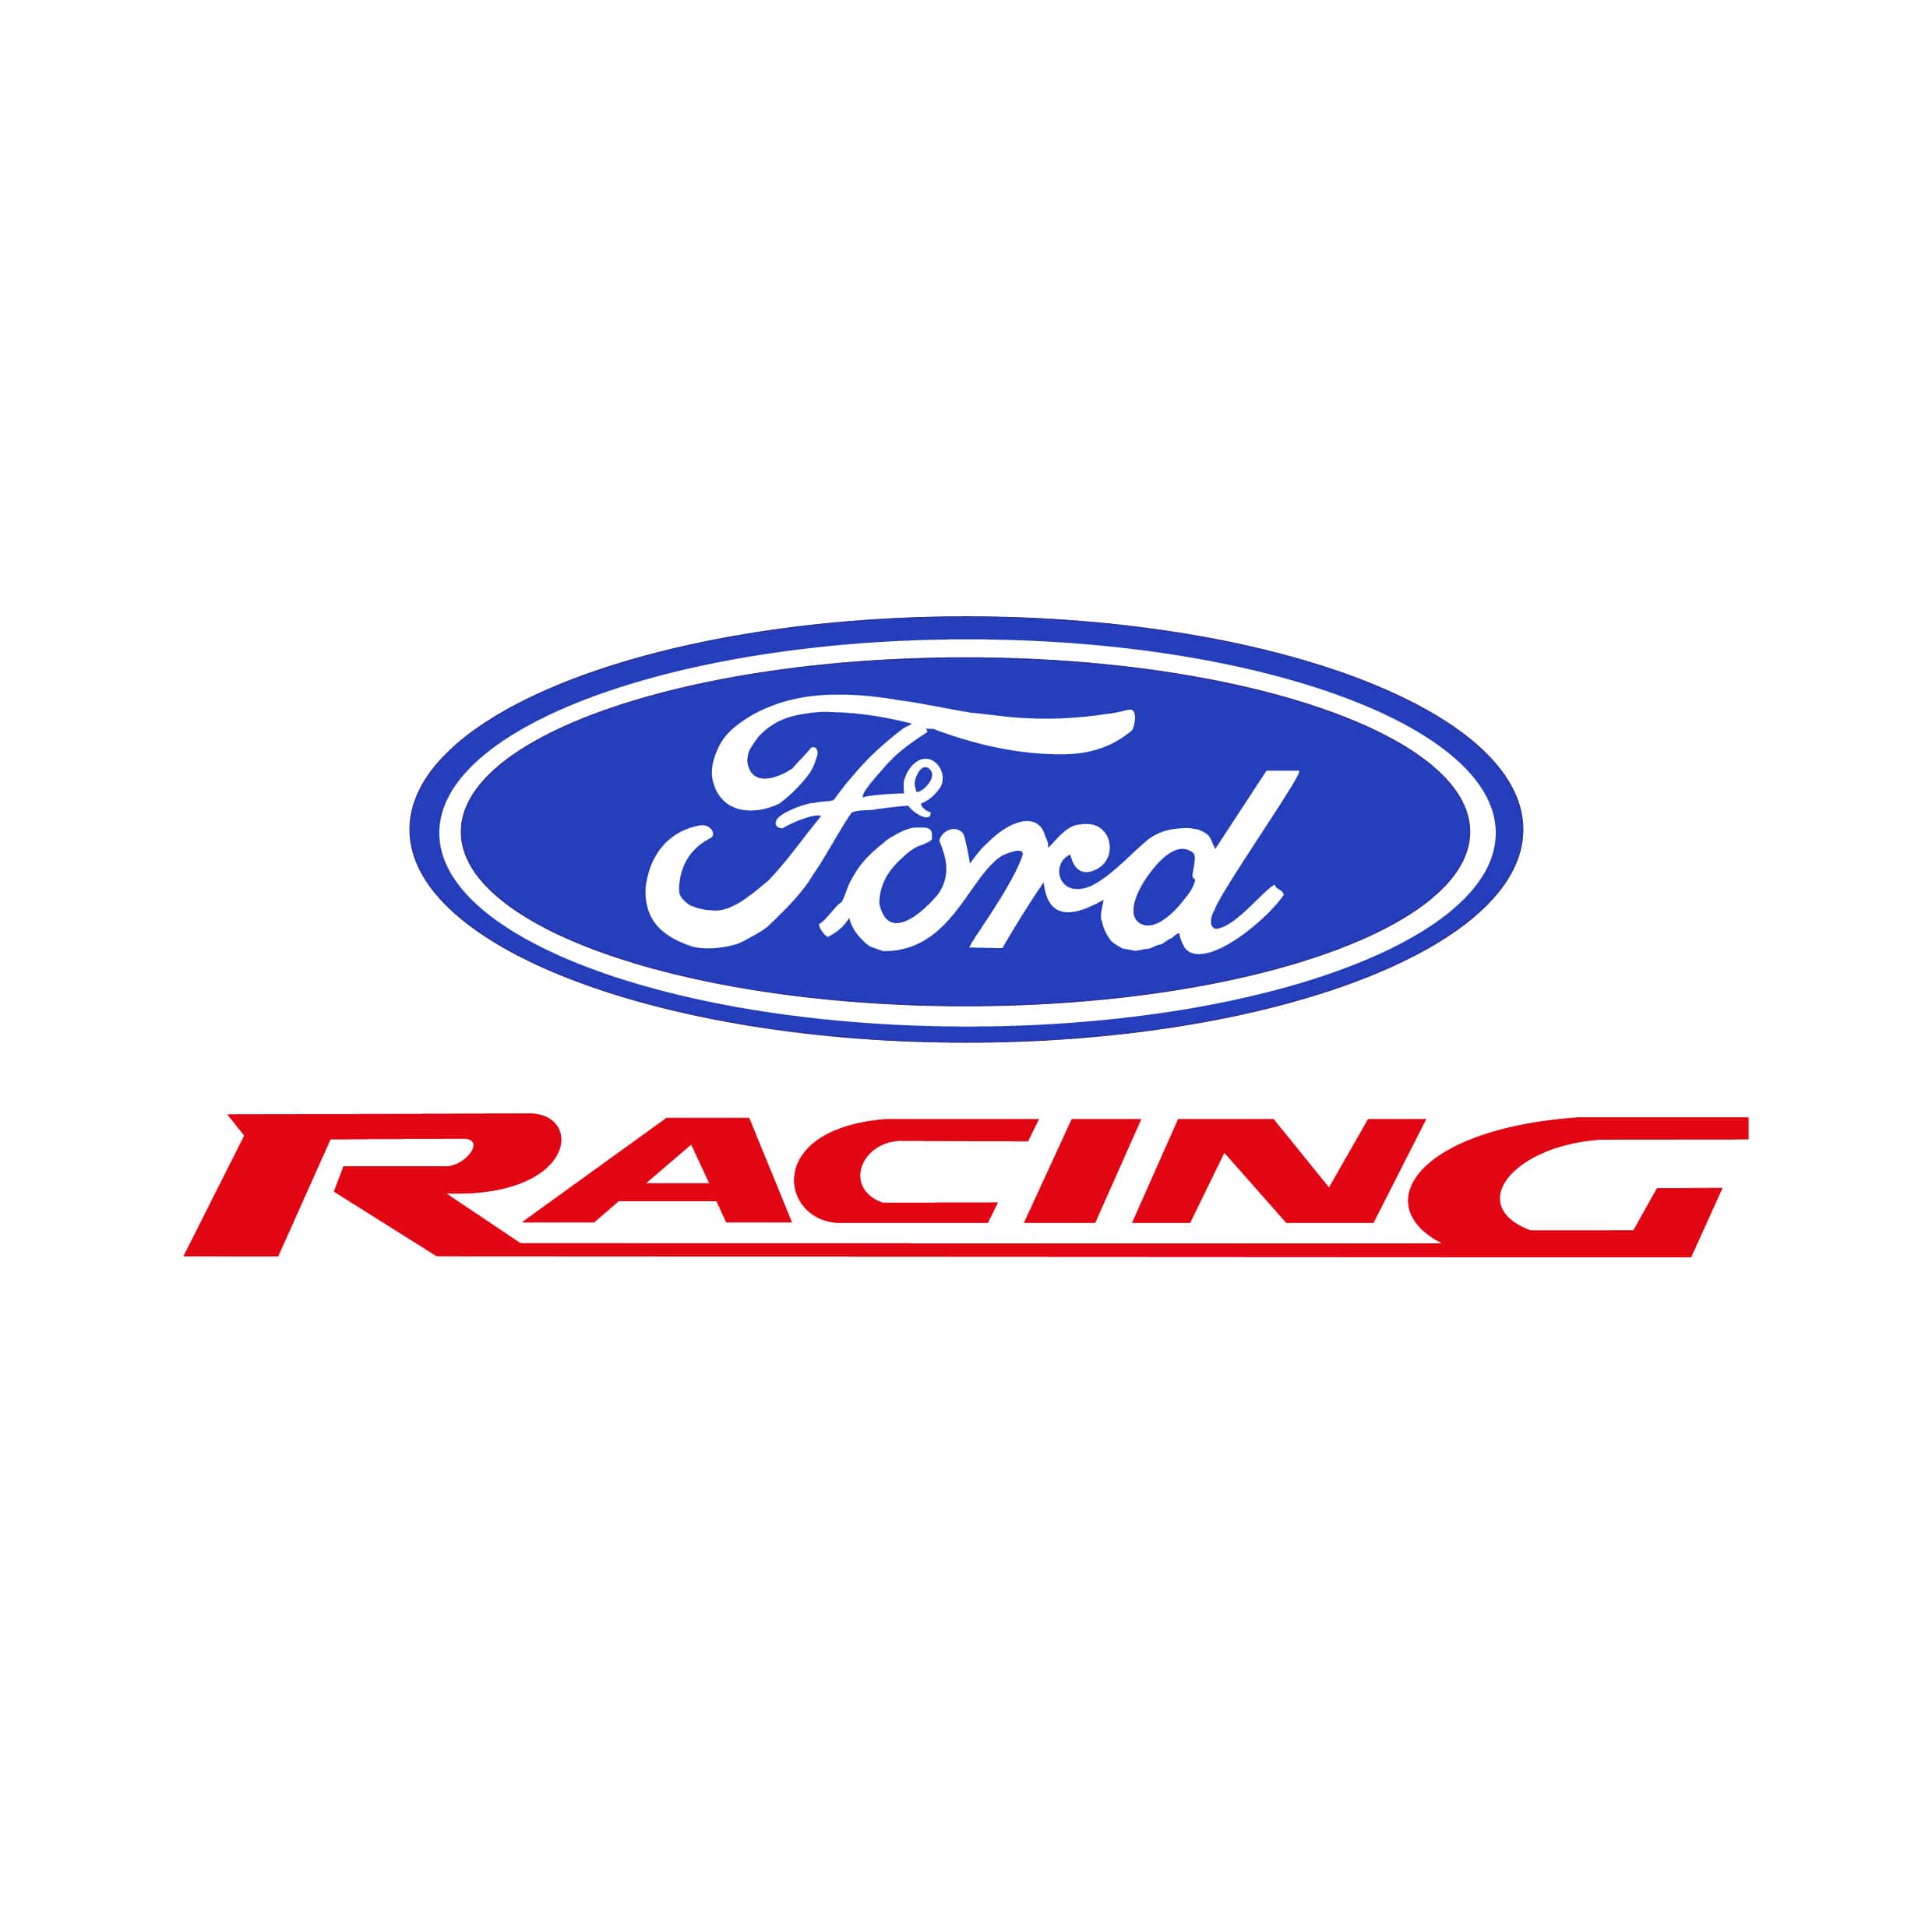 stickers-ford-racing-ref2-autocollant-voiture-sticker-auto-autocollants-decals-sponsors-racing-tuning-sport-logo-min